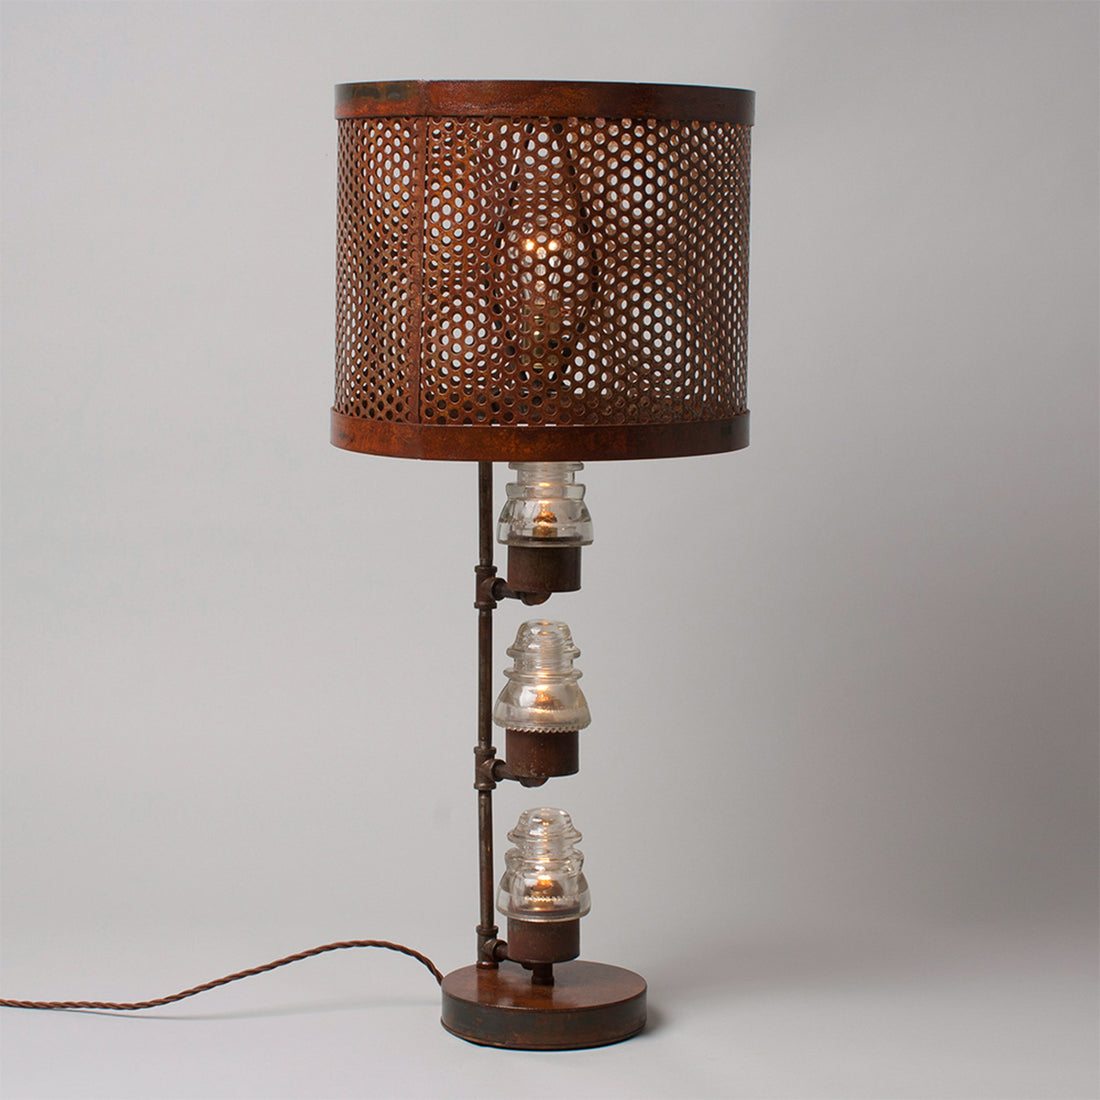 A traditional Hester &amp; Cook Telegraph Table Top Lamp with a metal shade and a basket on top.